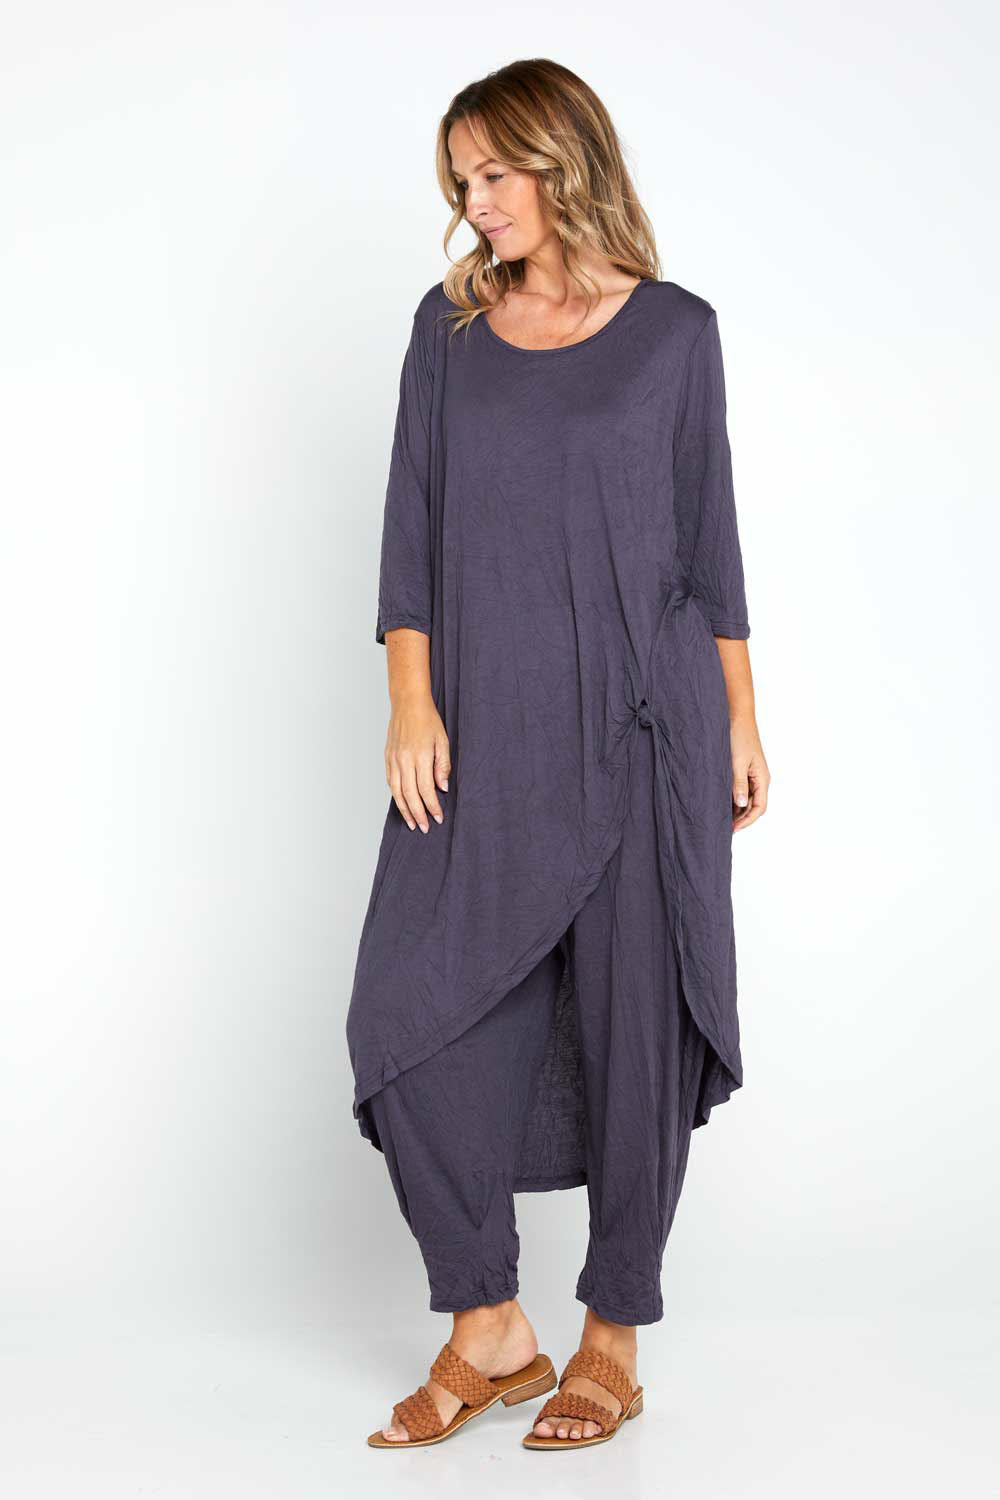 Ayana Cotton Tunic Top - Ink